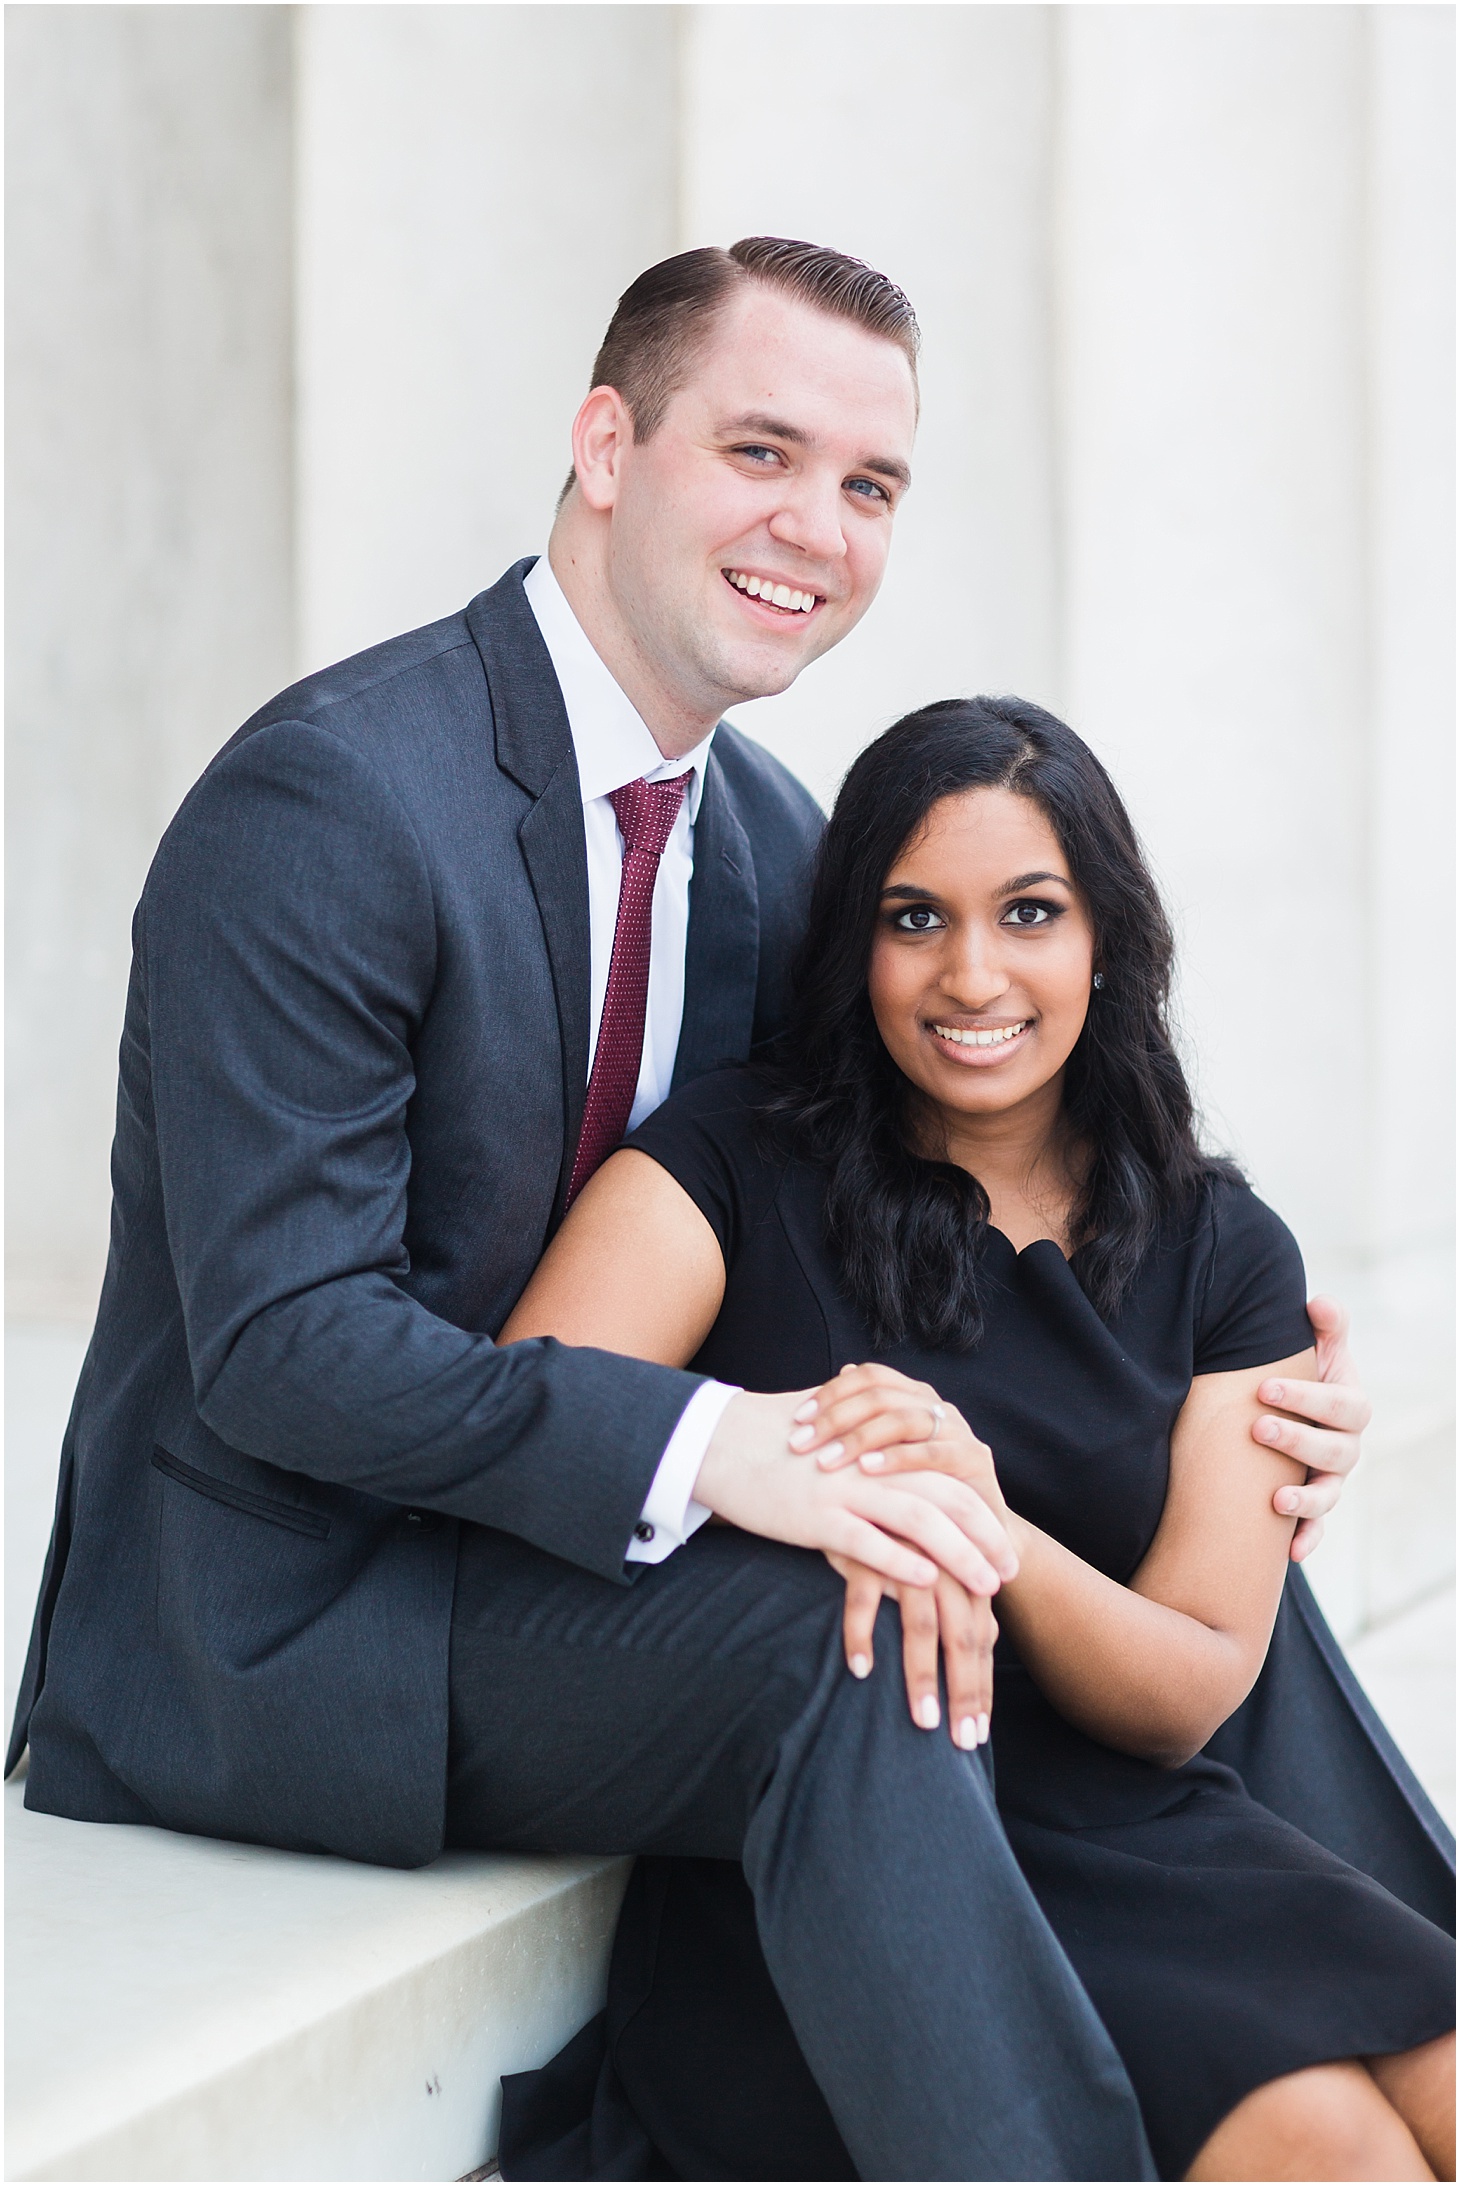 Summer Engagement Session in Washington DC | Formal Summer Engagement Session at Lincoln Memorial and Capitol Hill | Sarah Bradshaw Photography